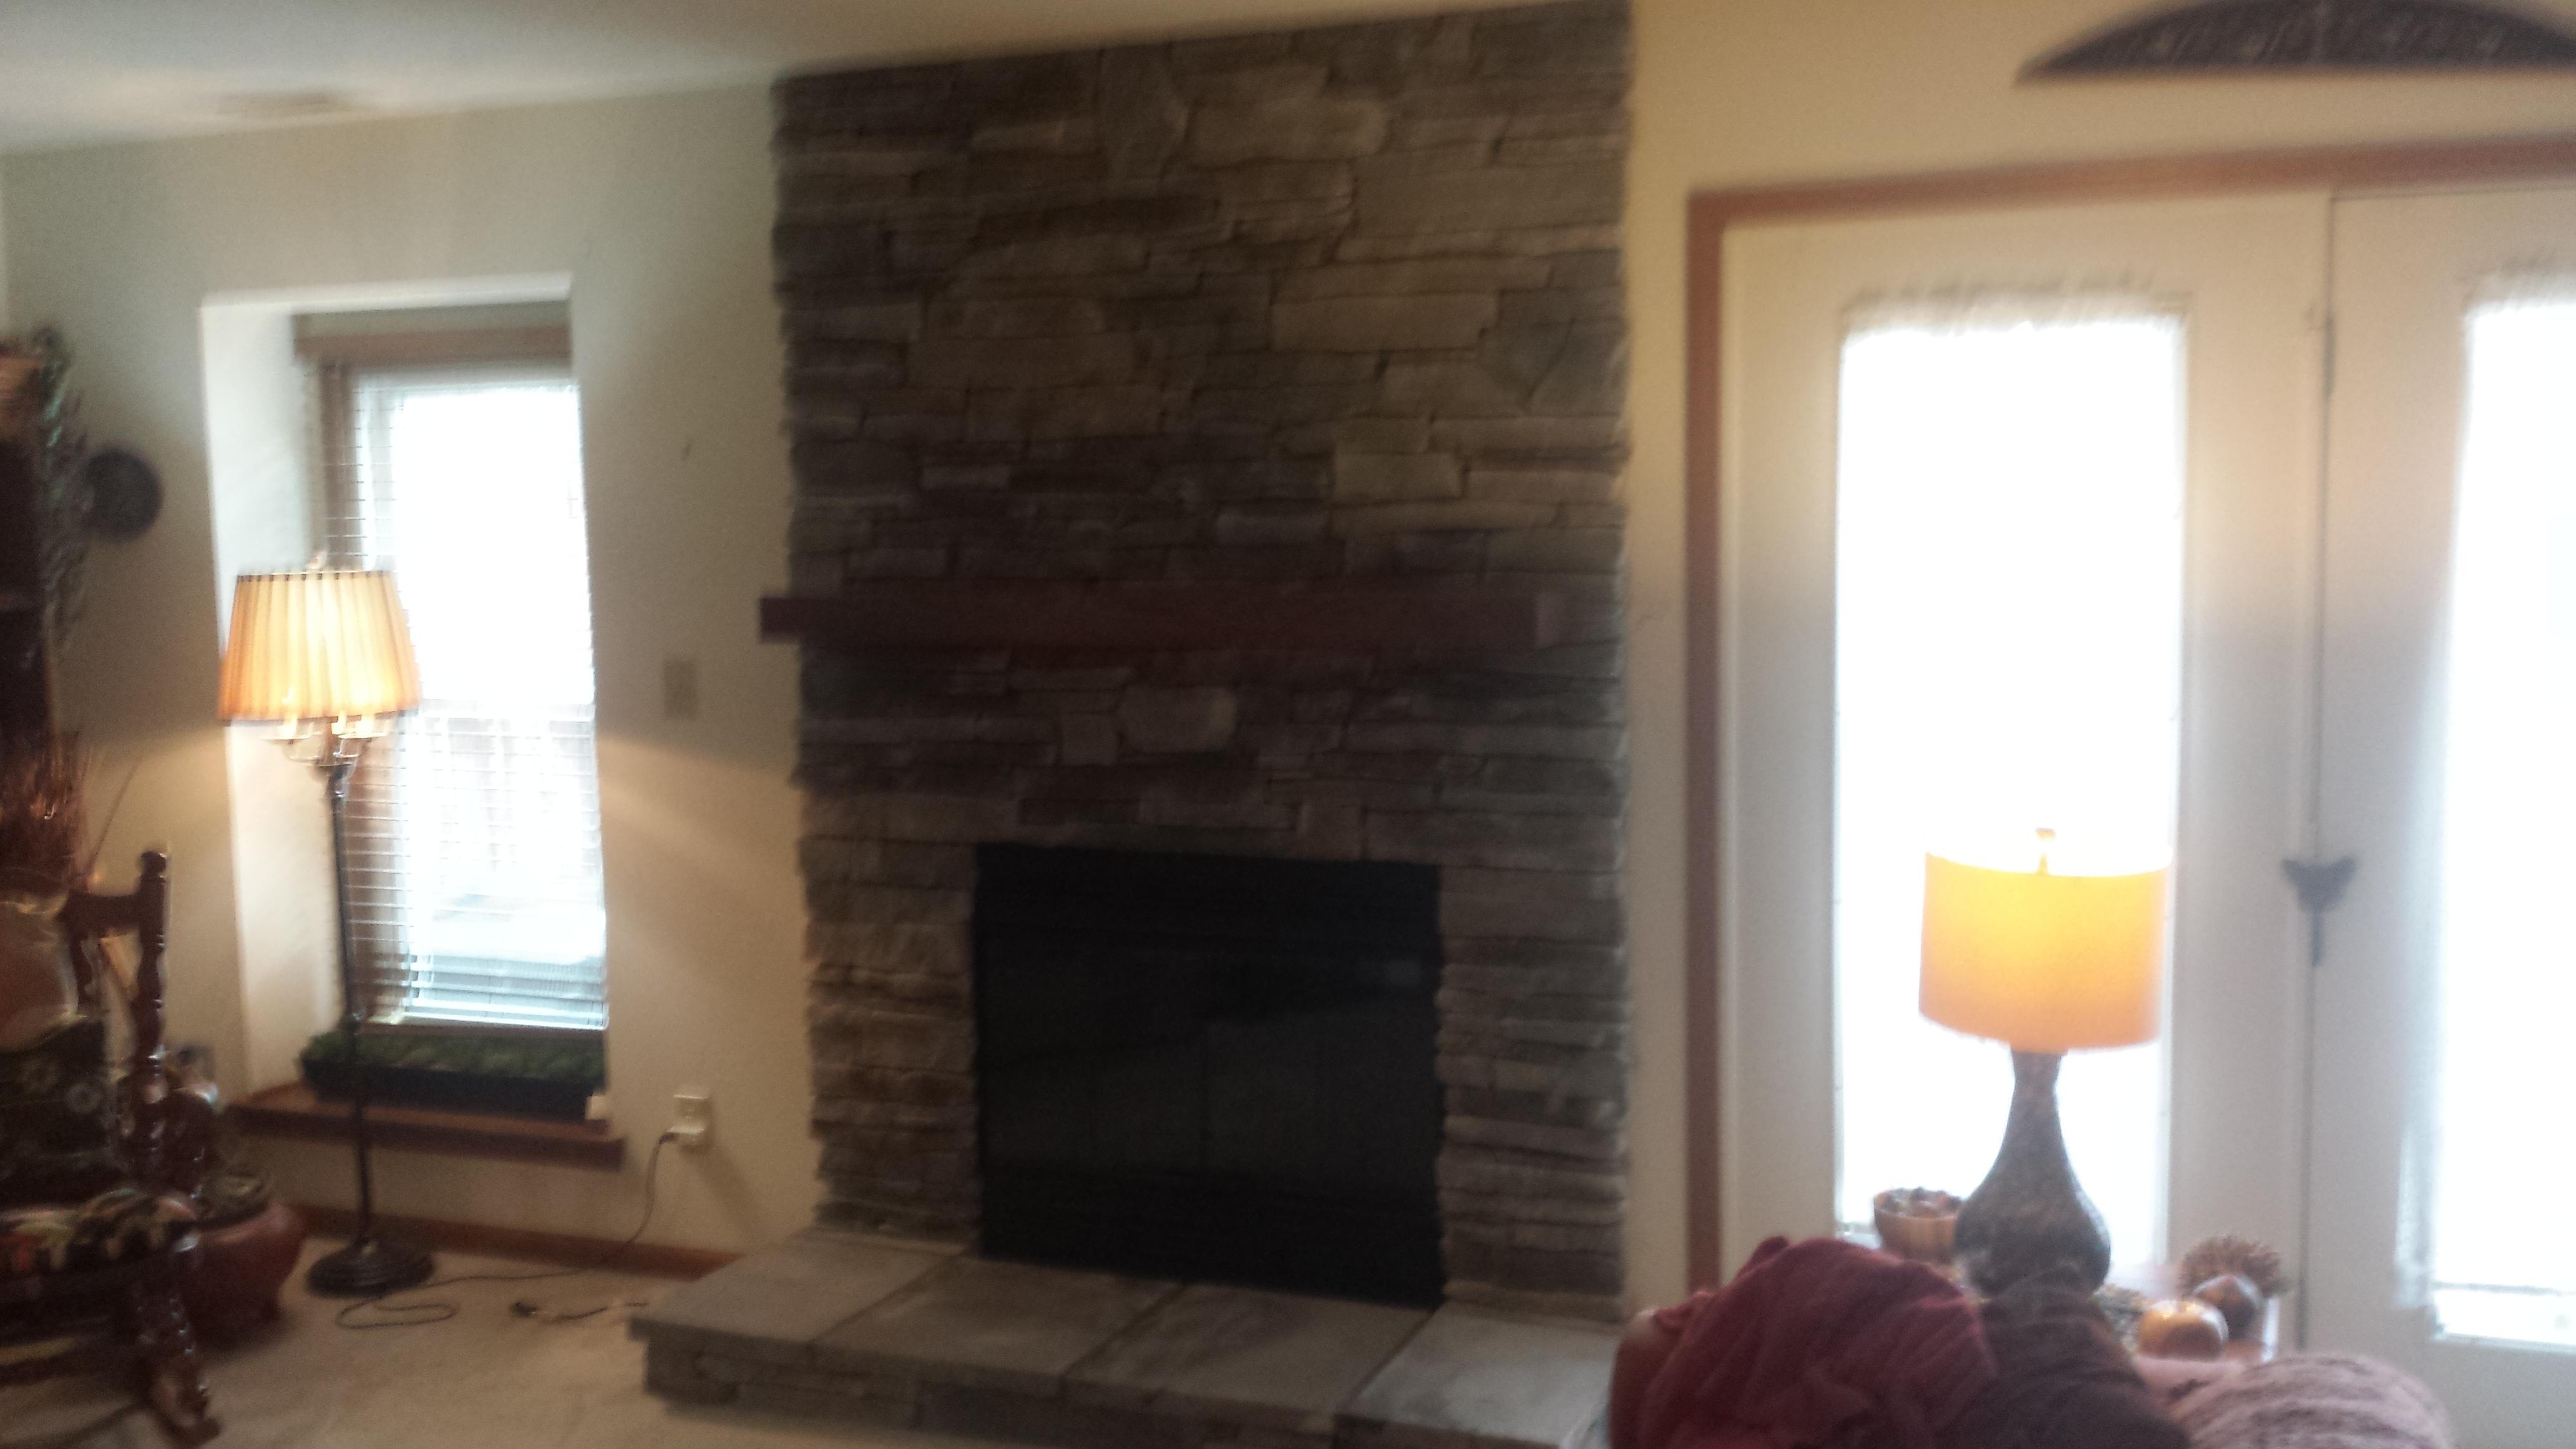 We demoed the old unit and fireplace face. We installed new